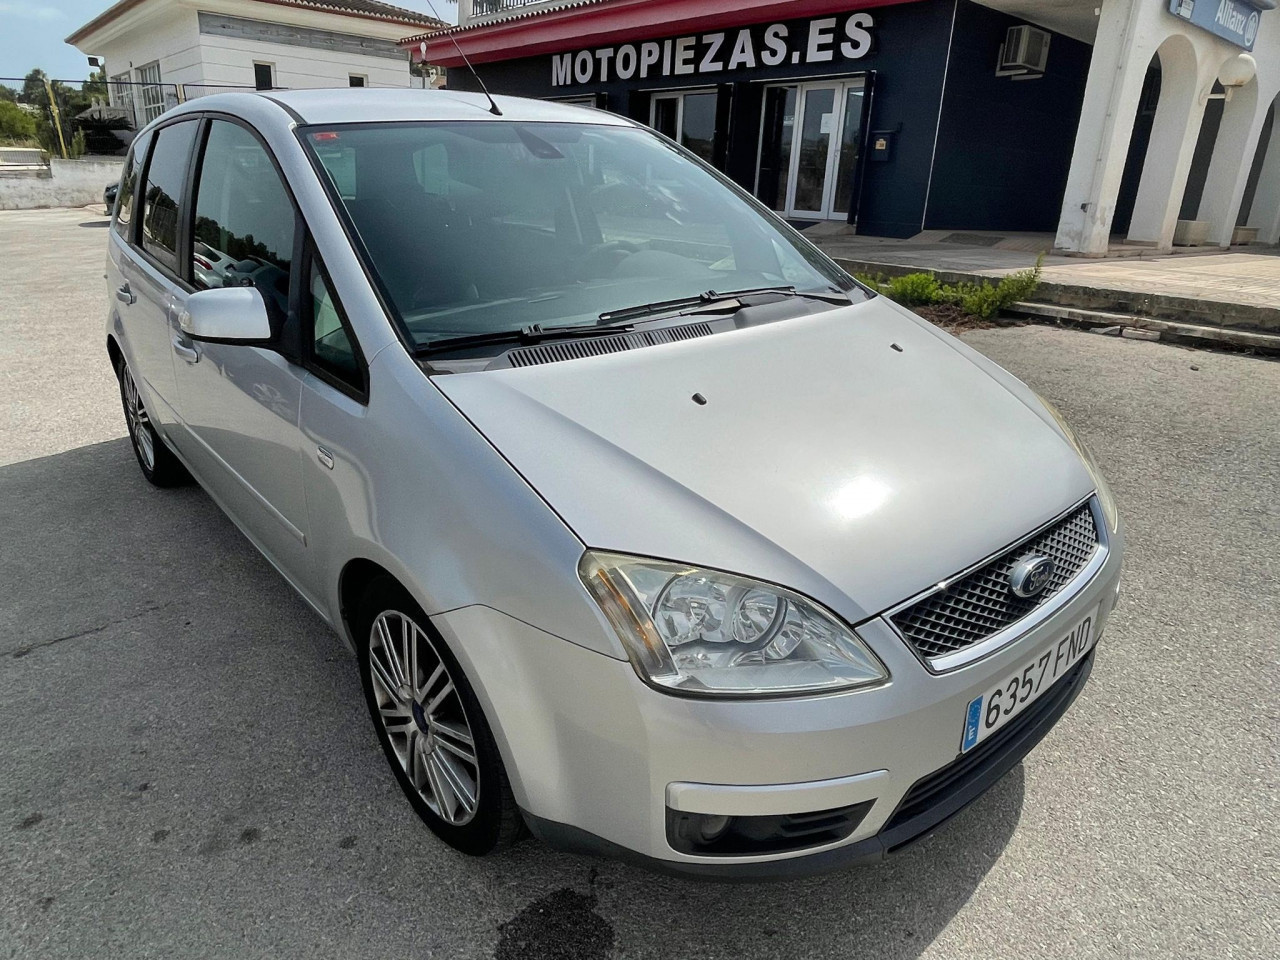 Ford Focus C-Max Ghia Automatic Hatchback 2007 